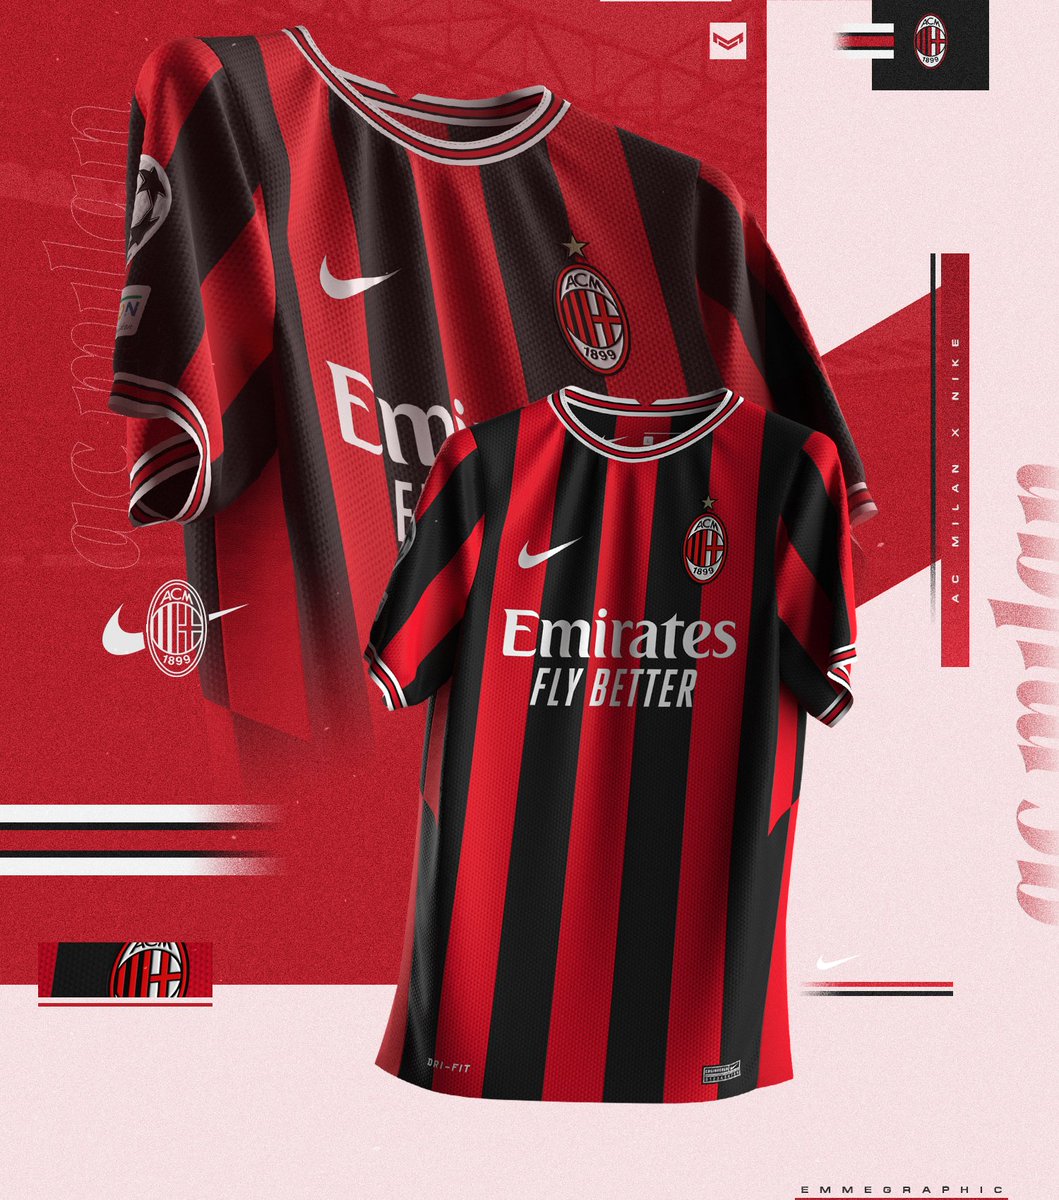 emmegraphic on Twitter: "🖌️⚽ | 𝗔𝗖 𝗠𝗶𝗹𝗮𝗻 • #Nike | home jersey concept • | What do you think? Drop a comment All the logos on this concept jersey are